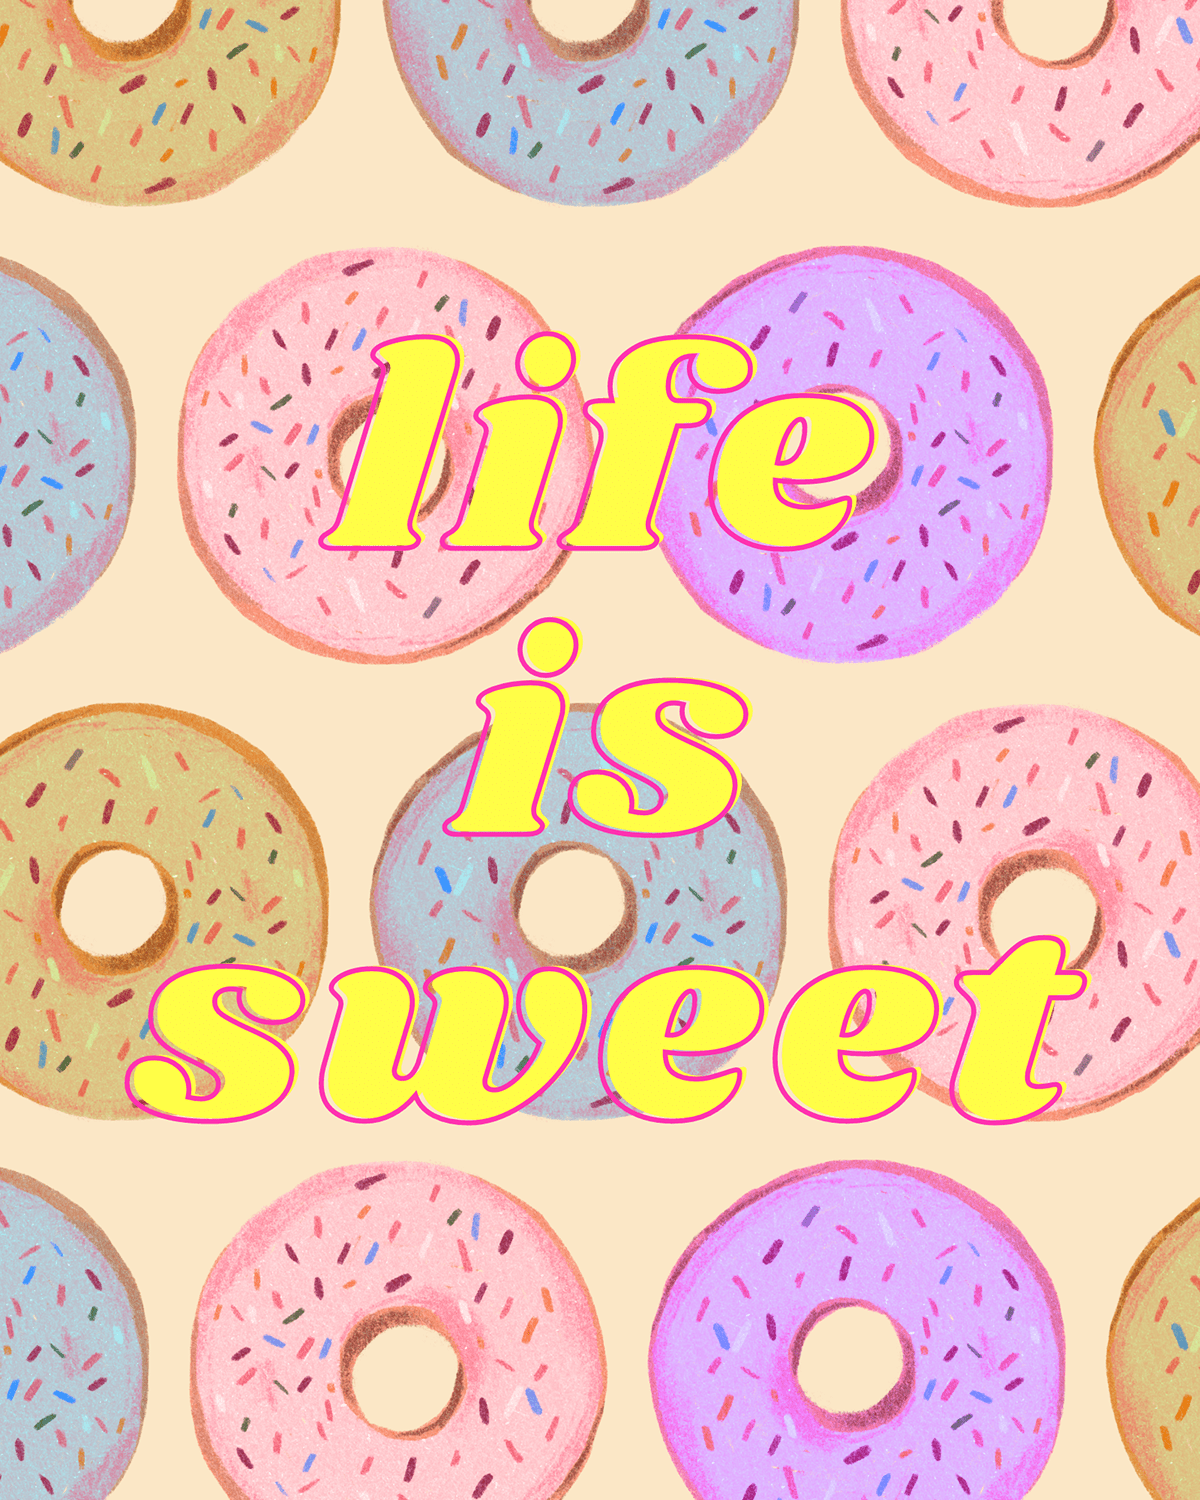 design Poster Design Donuts Sweets colorful Patterns